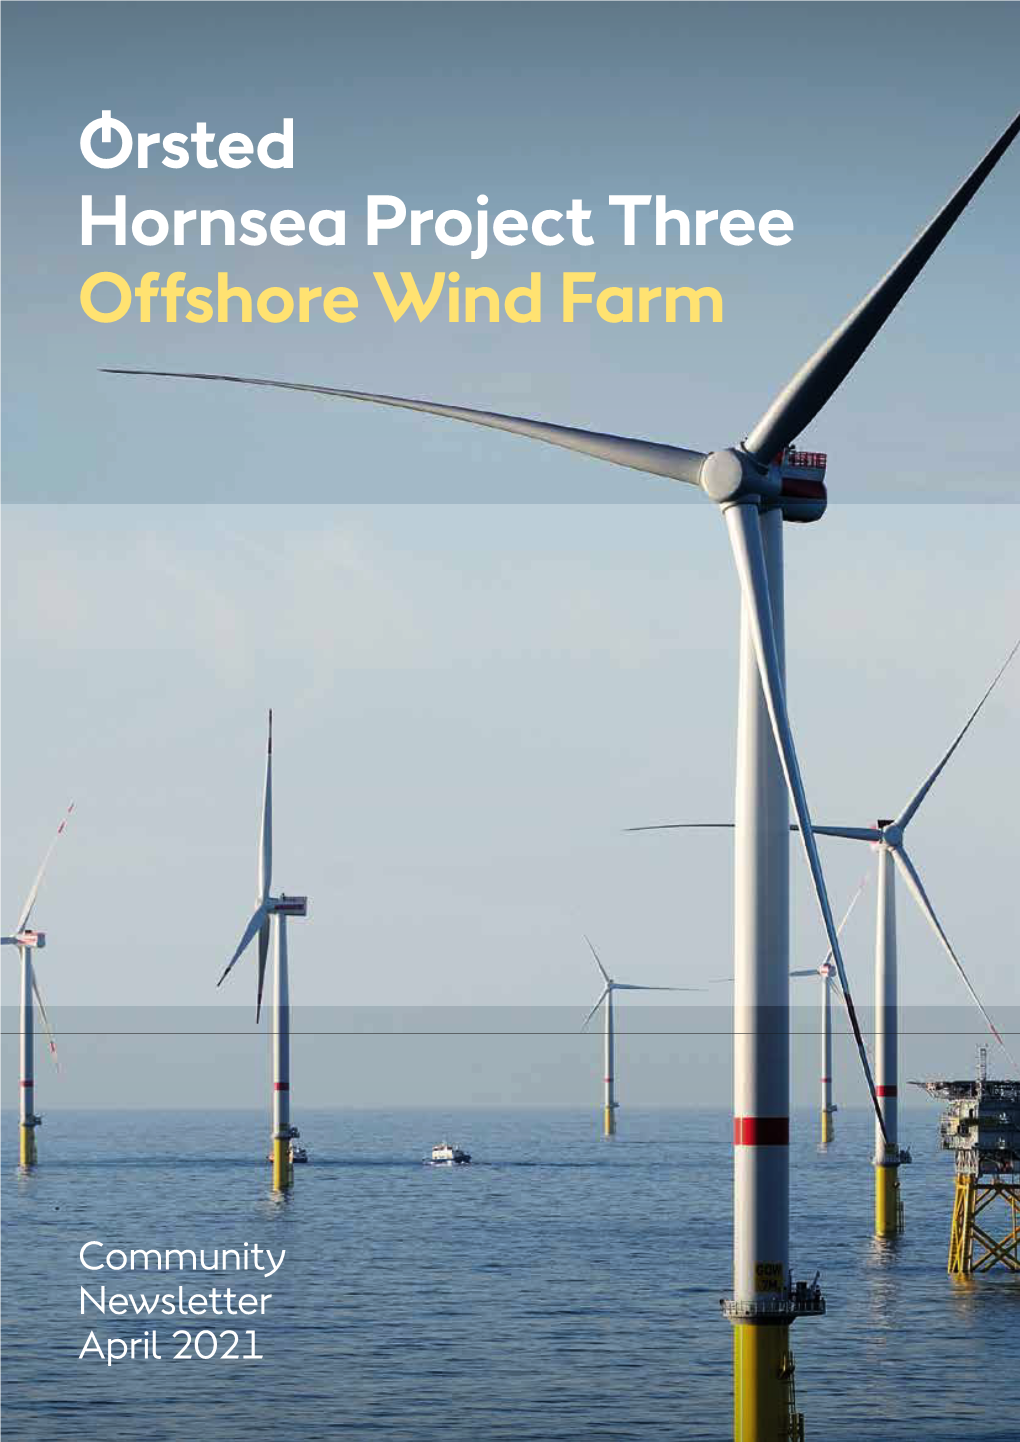 Ørsted Hornsea Project Three Offshore Wind Farm